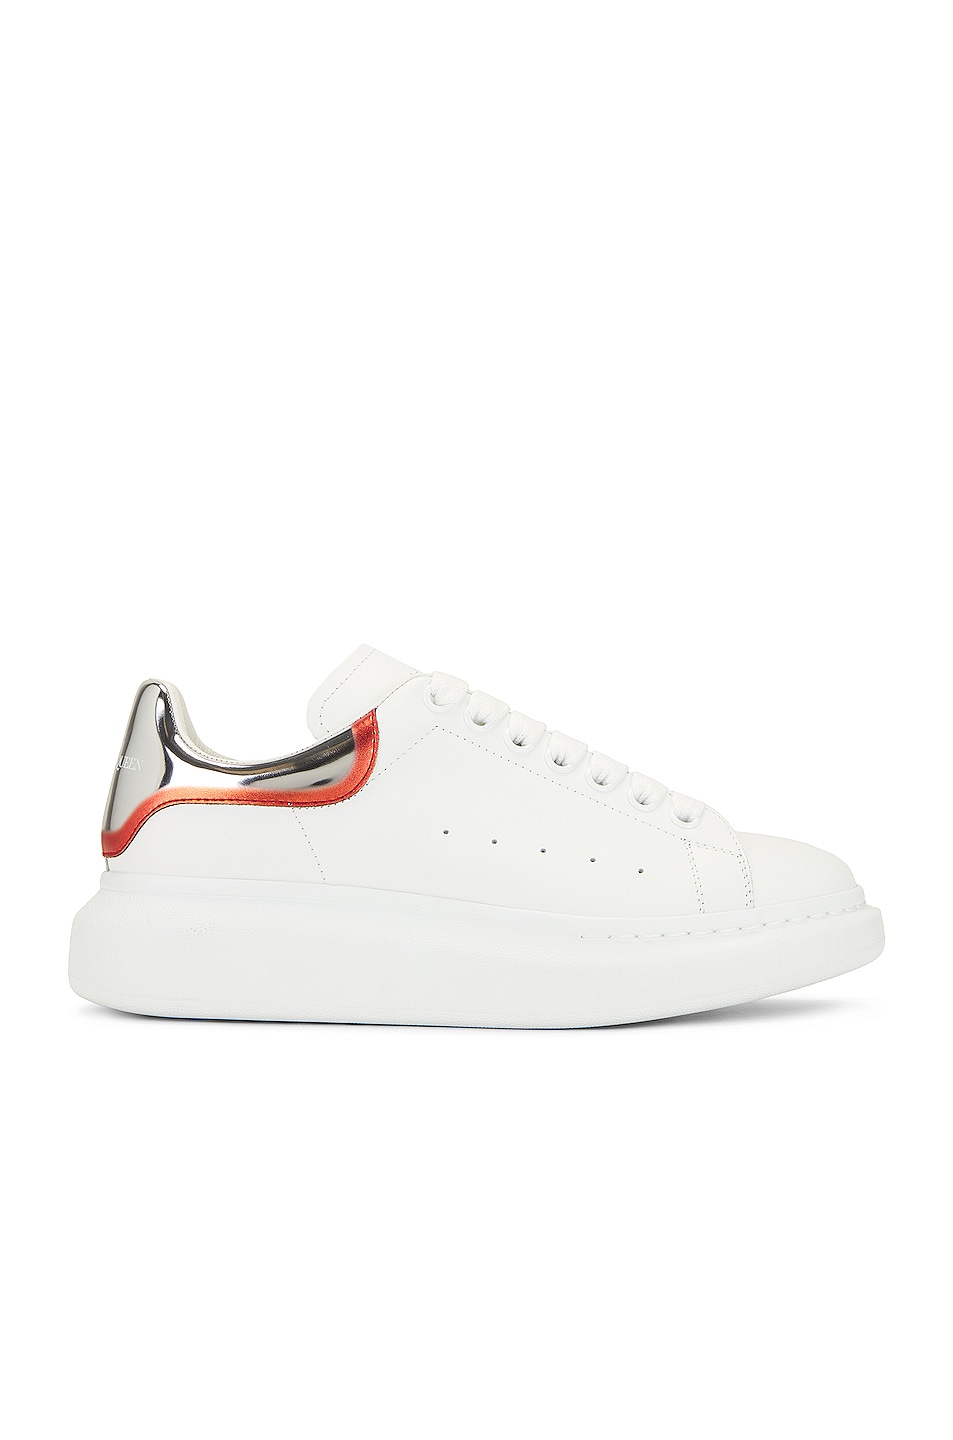 Image 1 of Alexander McQueen Sneaker in White, Silver & Lust Red